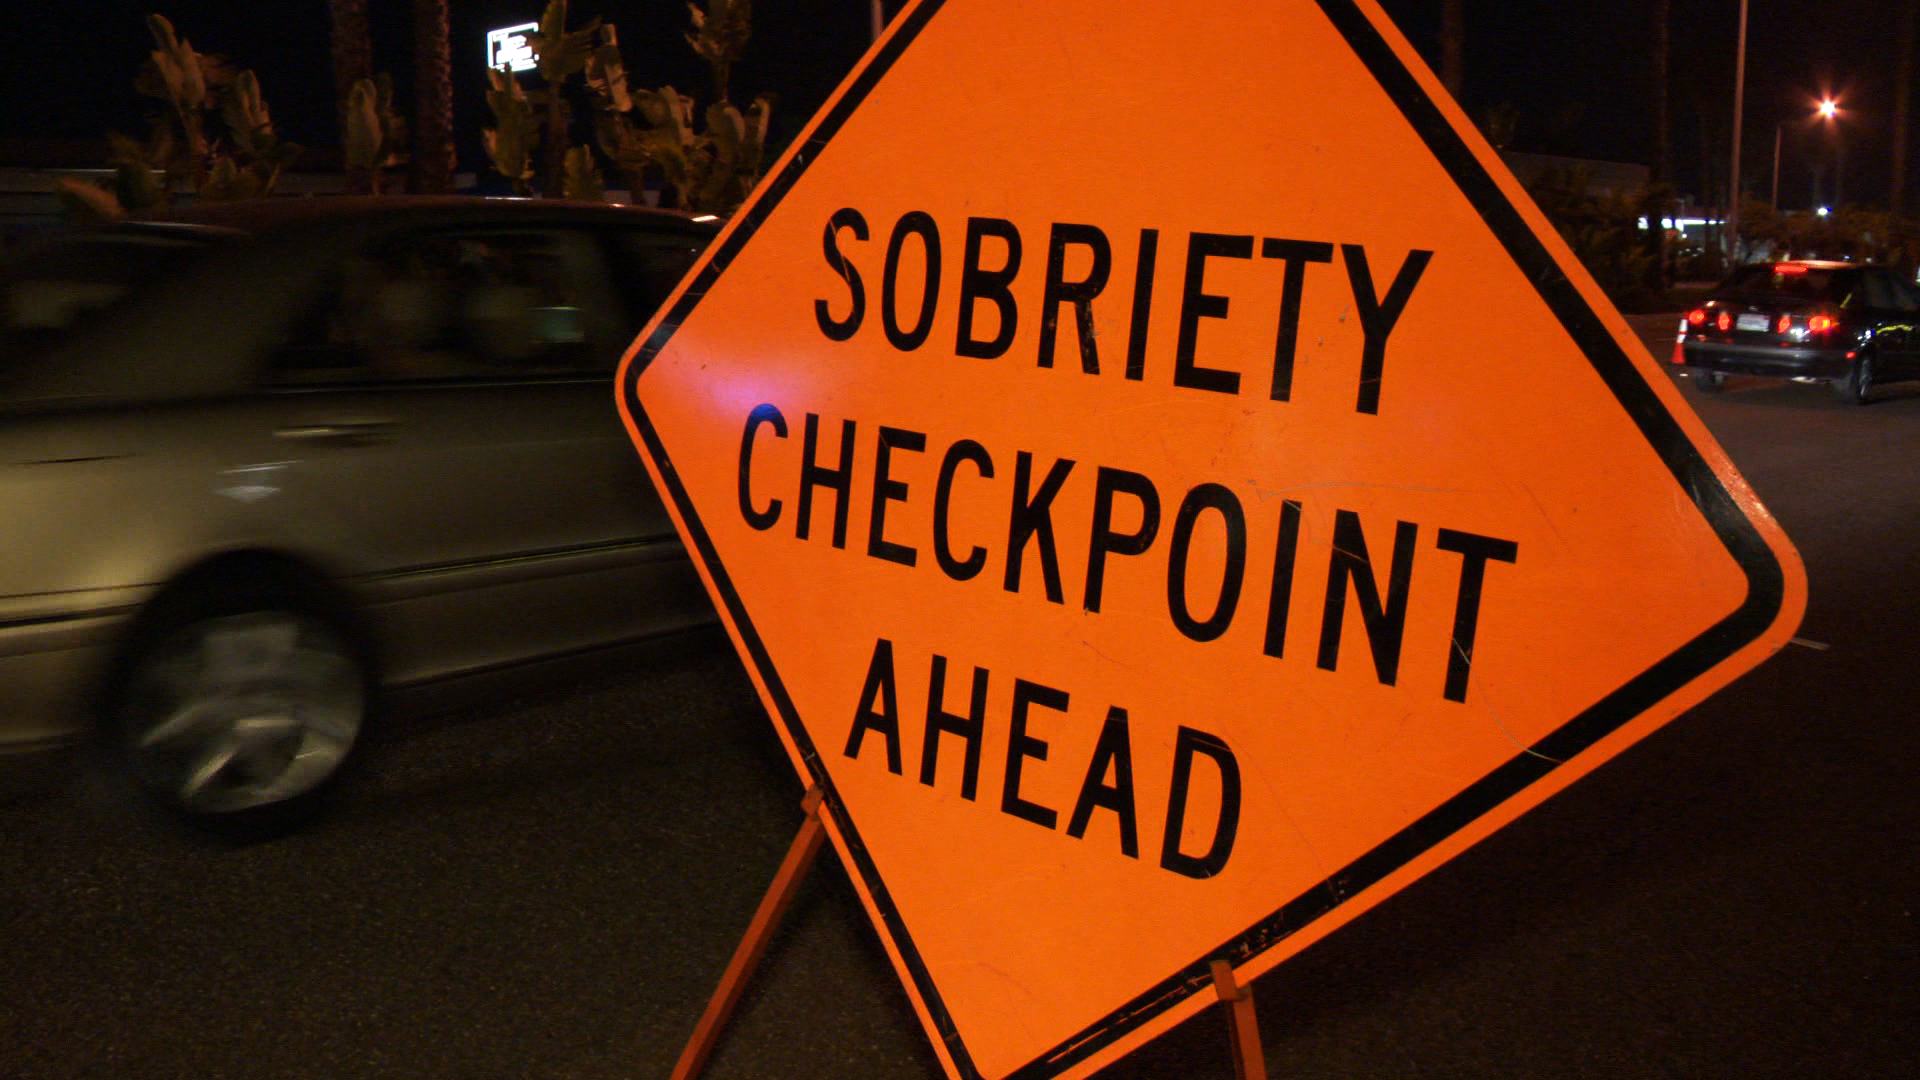 Watch out for DUI checkpoints in PA this weekend